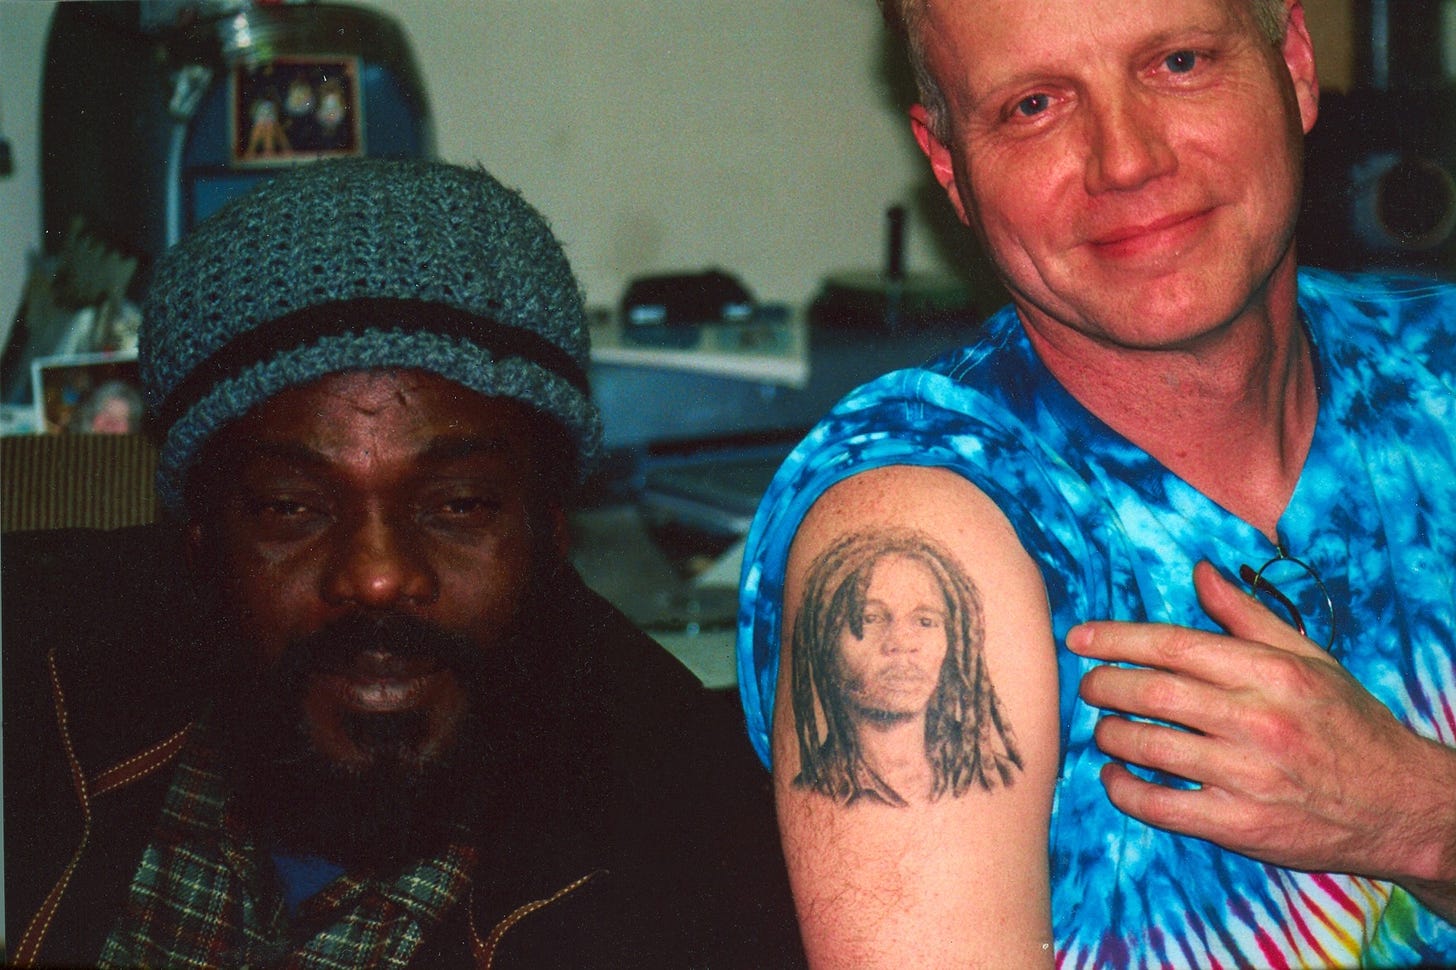 r to mine, and we had to snap a photo.    Me showing off my Bob Marley tattoo to Aston “Family Man” Barrett of the Wailers, 2007